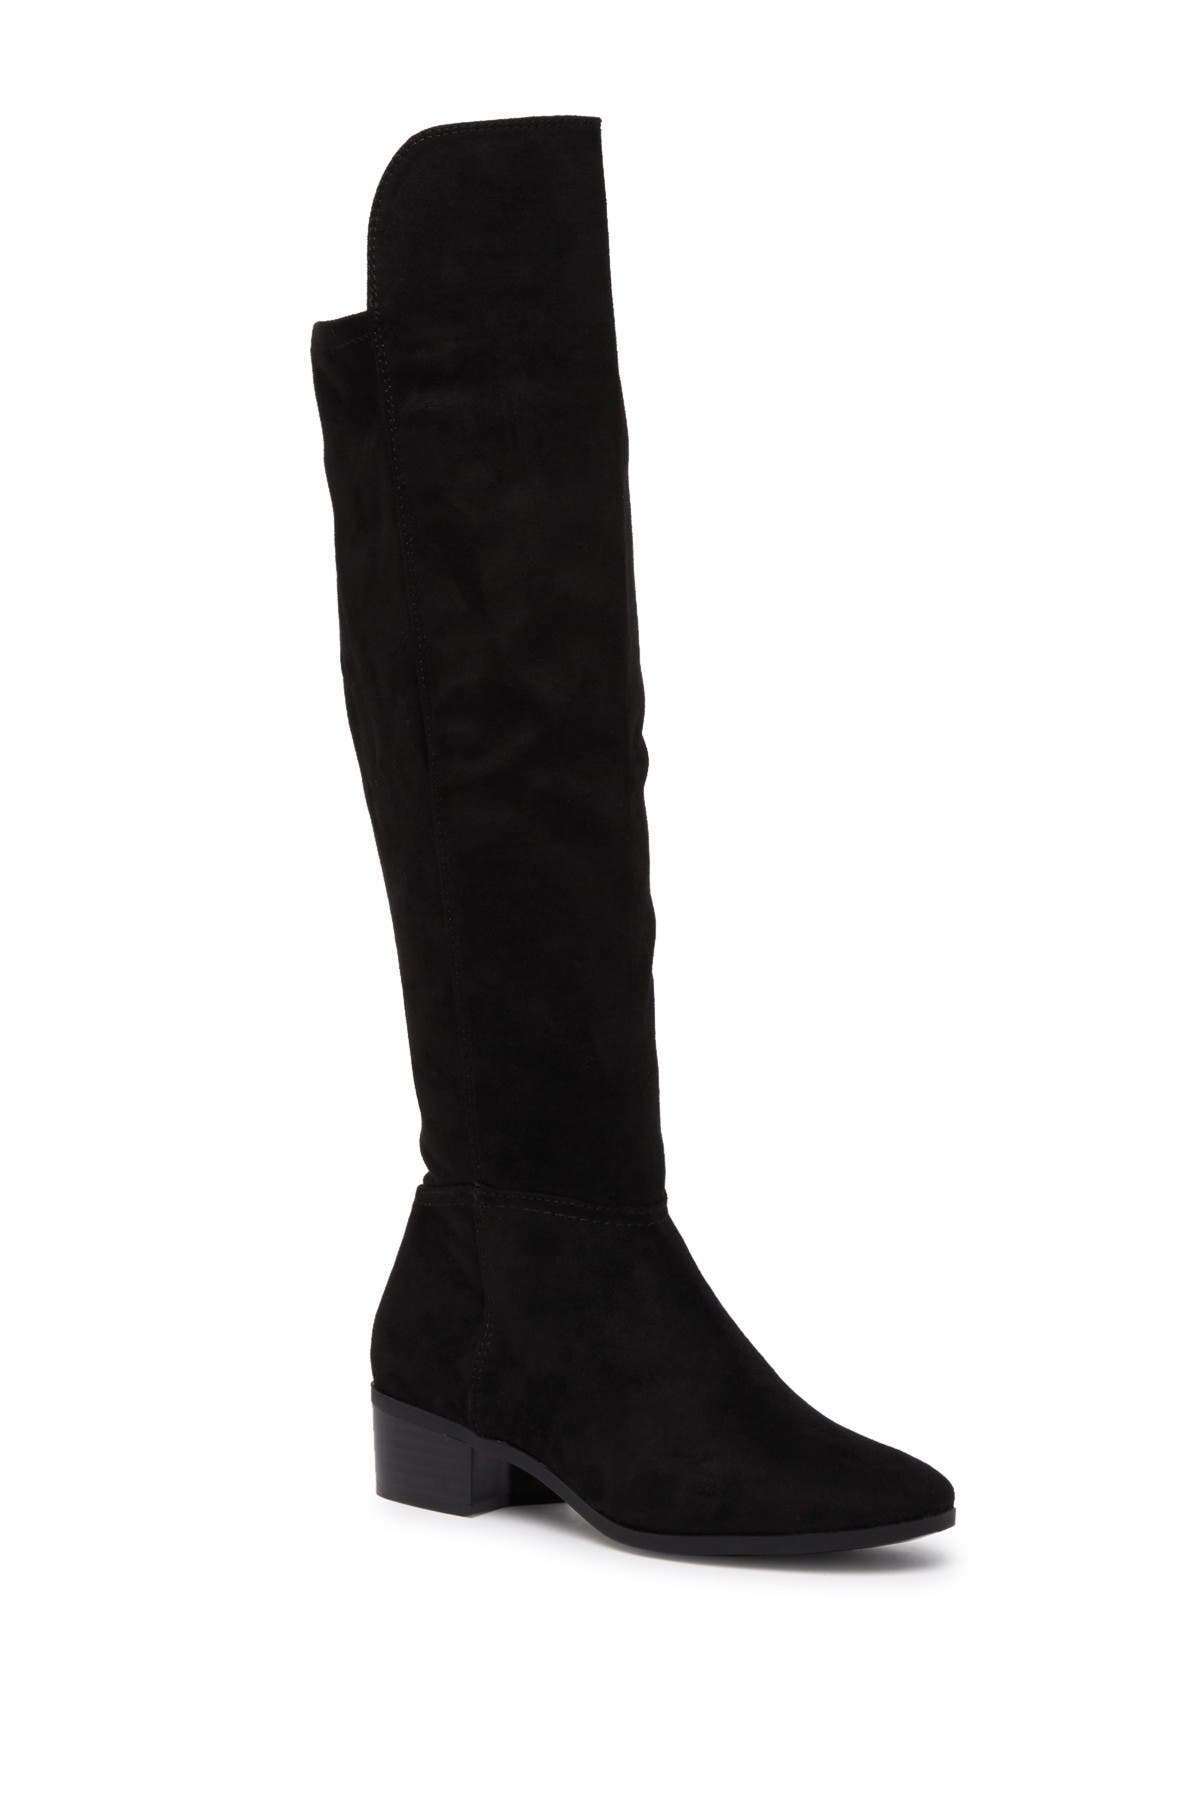 Call It Spring | Delania Knee High Boot 